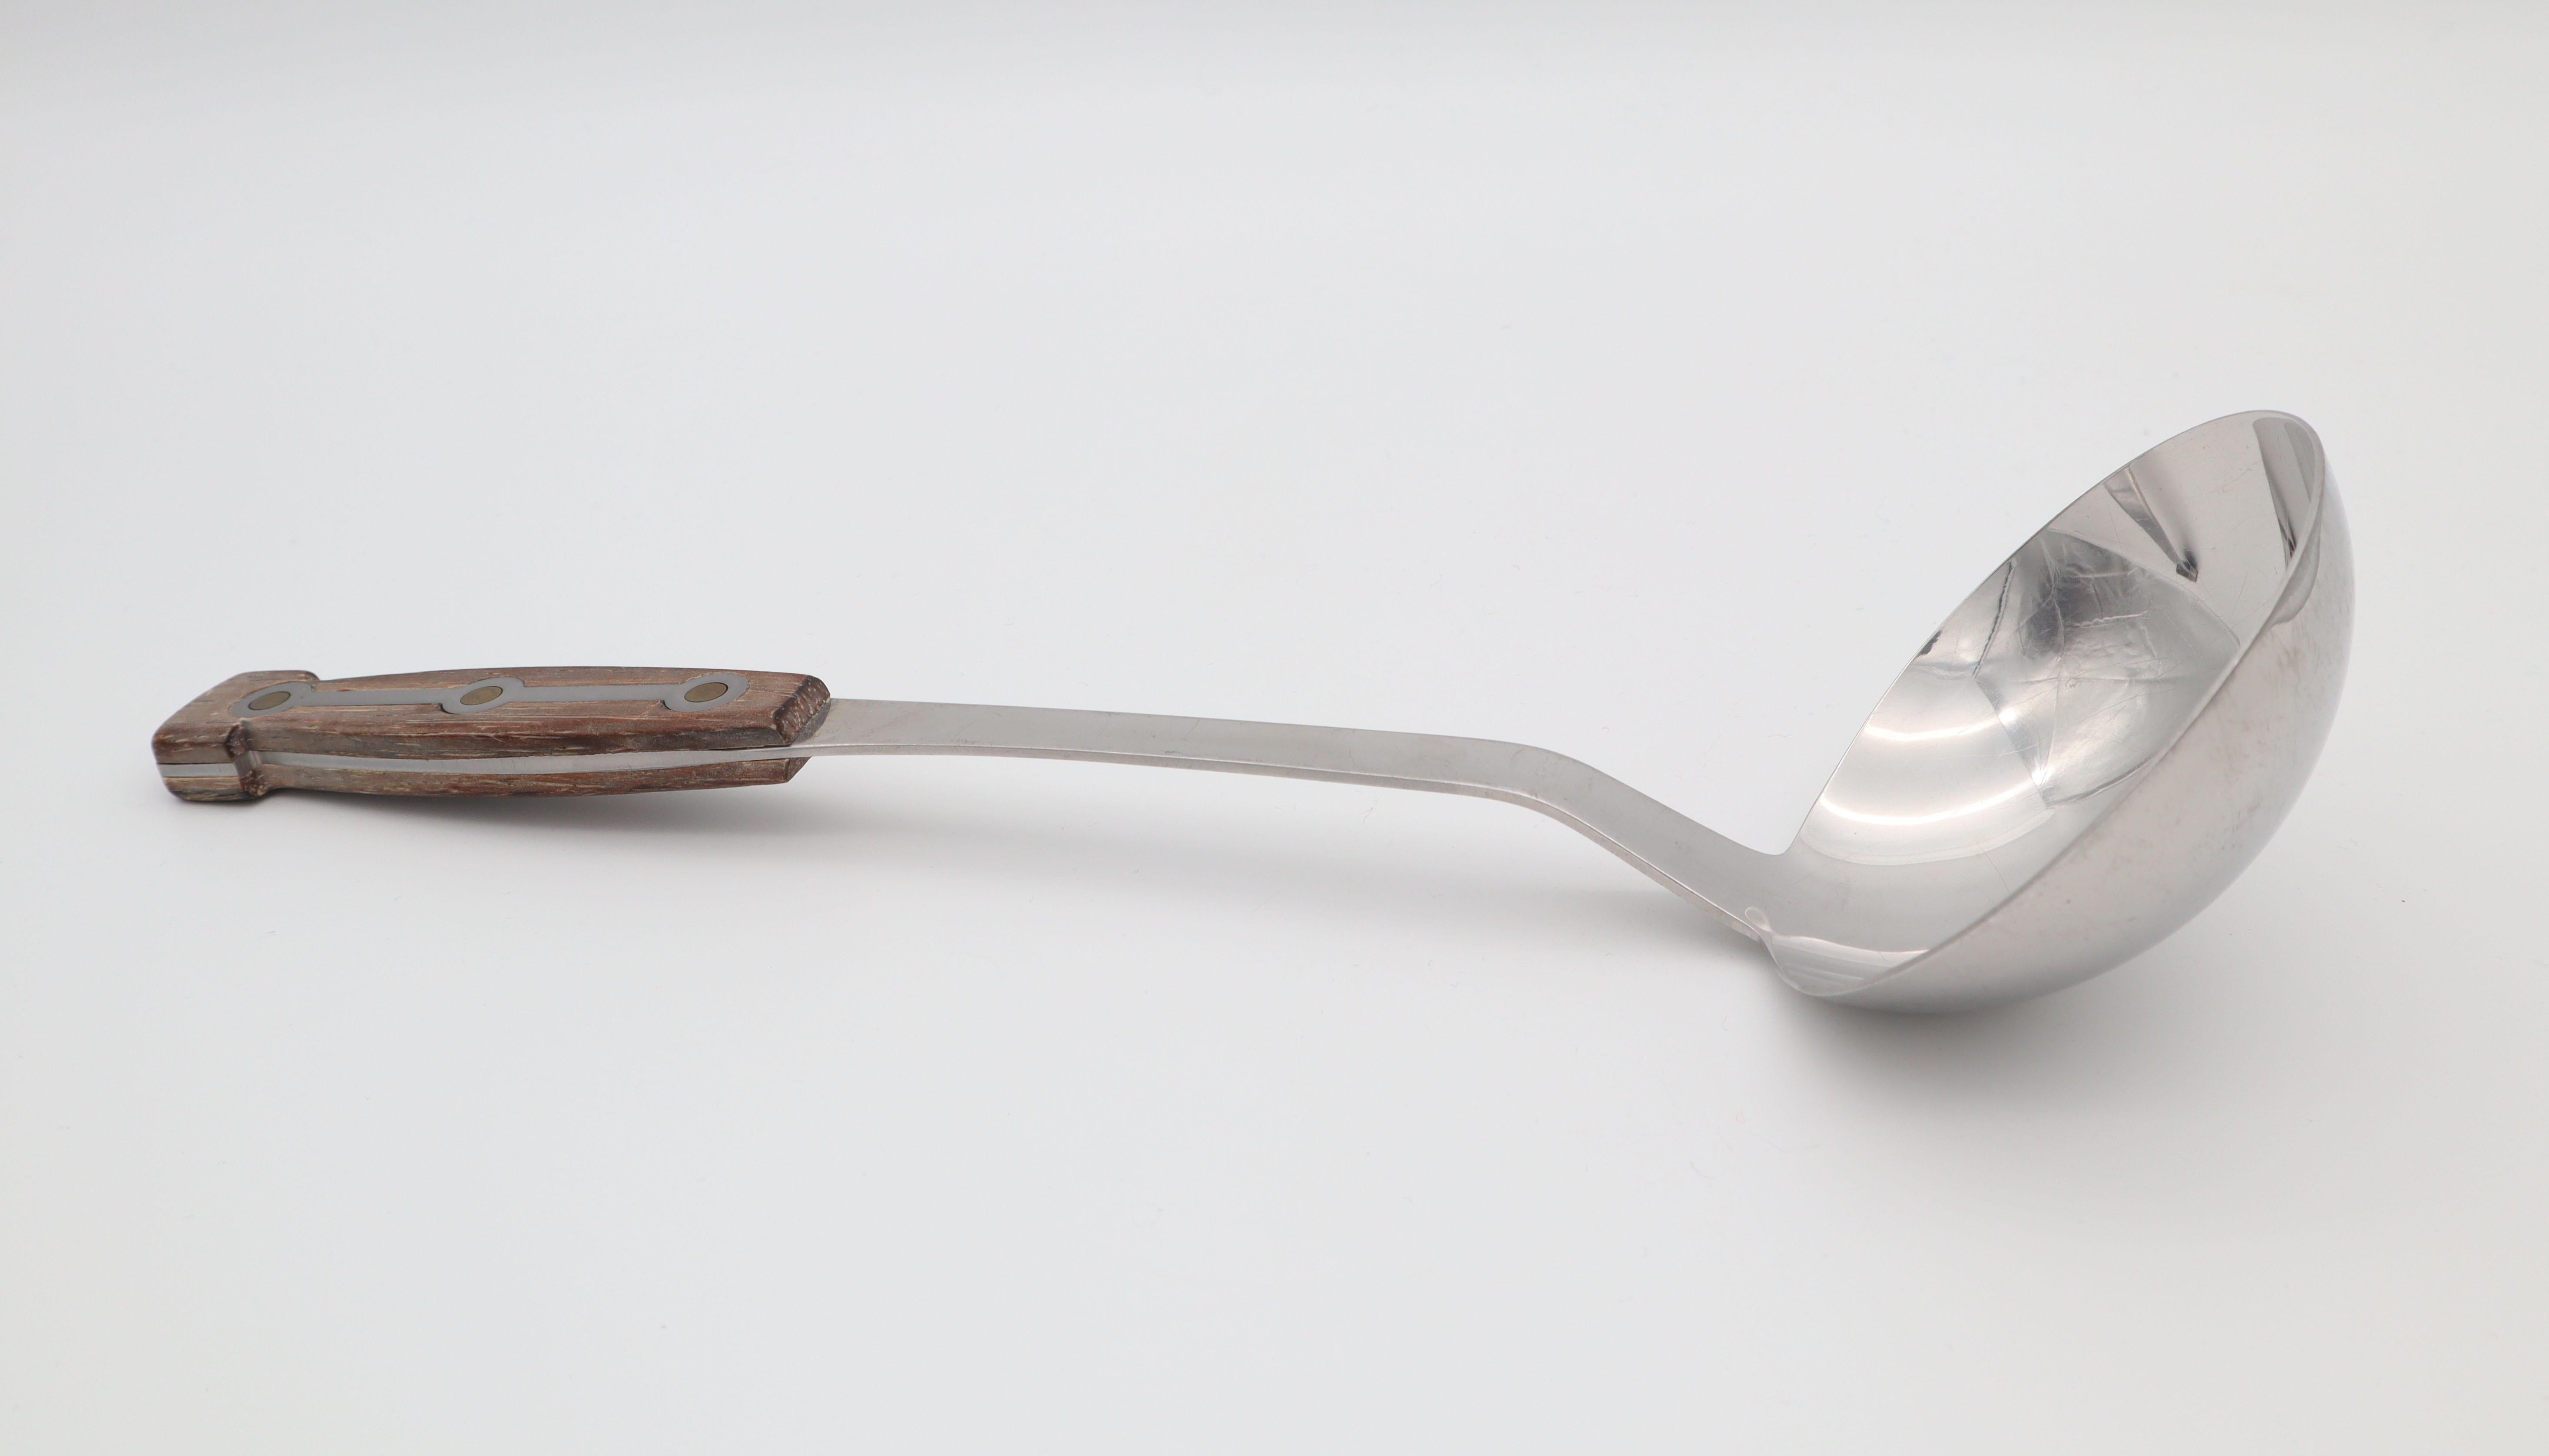 20th Century Cutlery Model 1050 with Wooden Handle from Amboss Austria